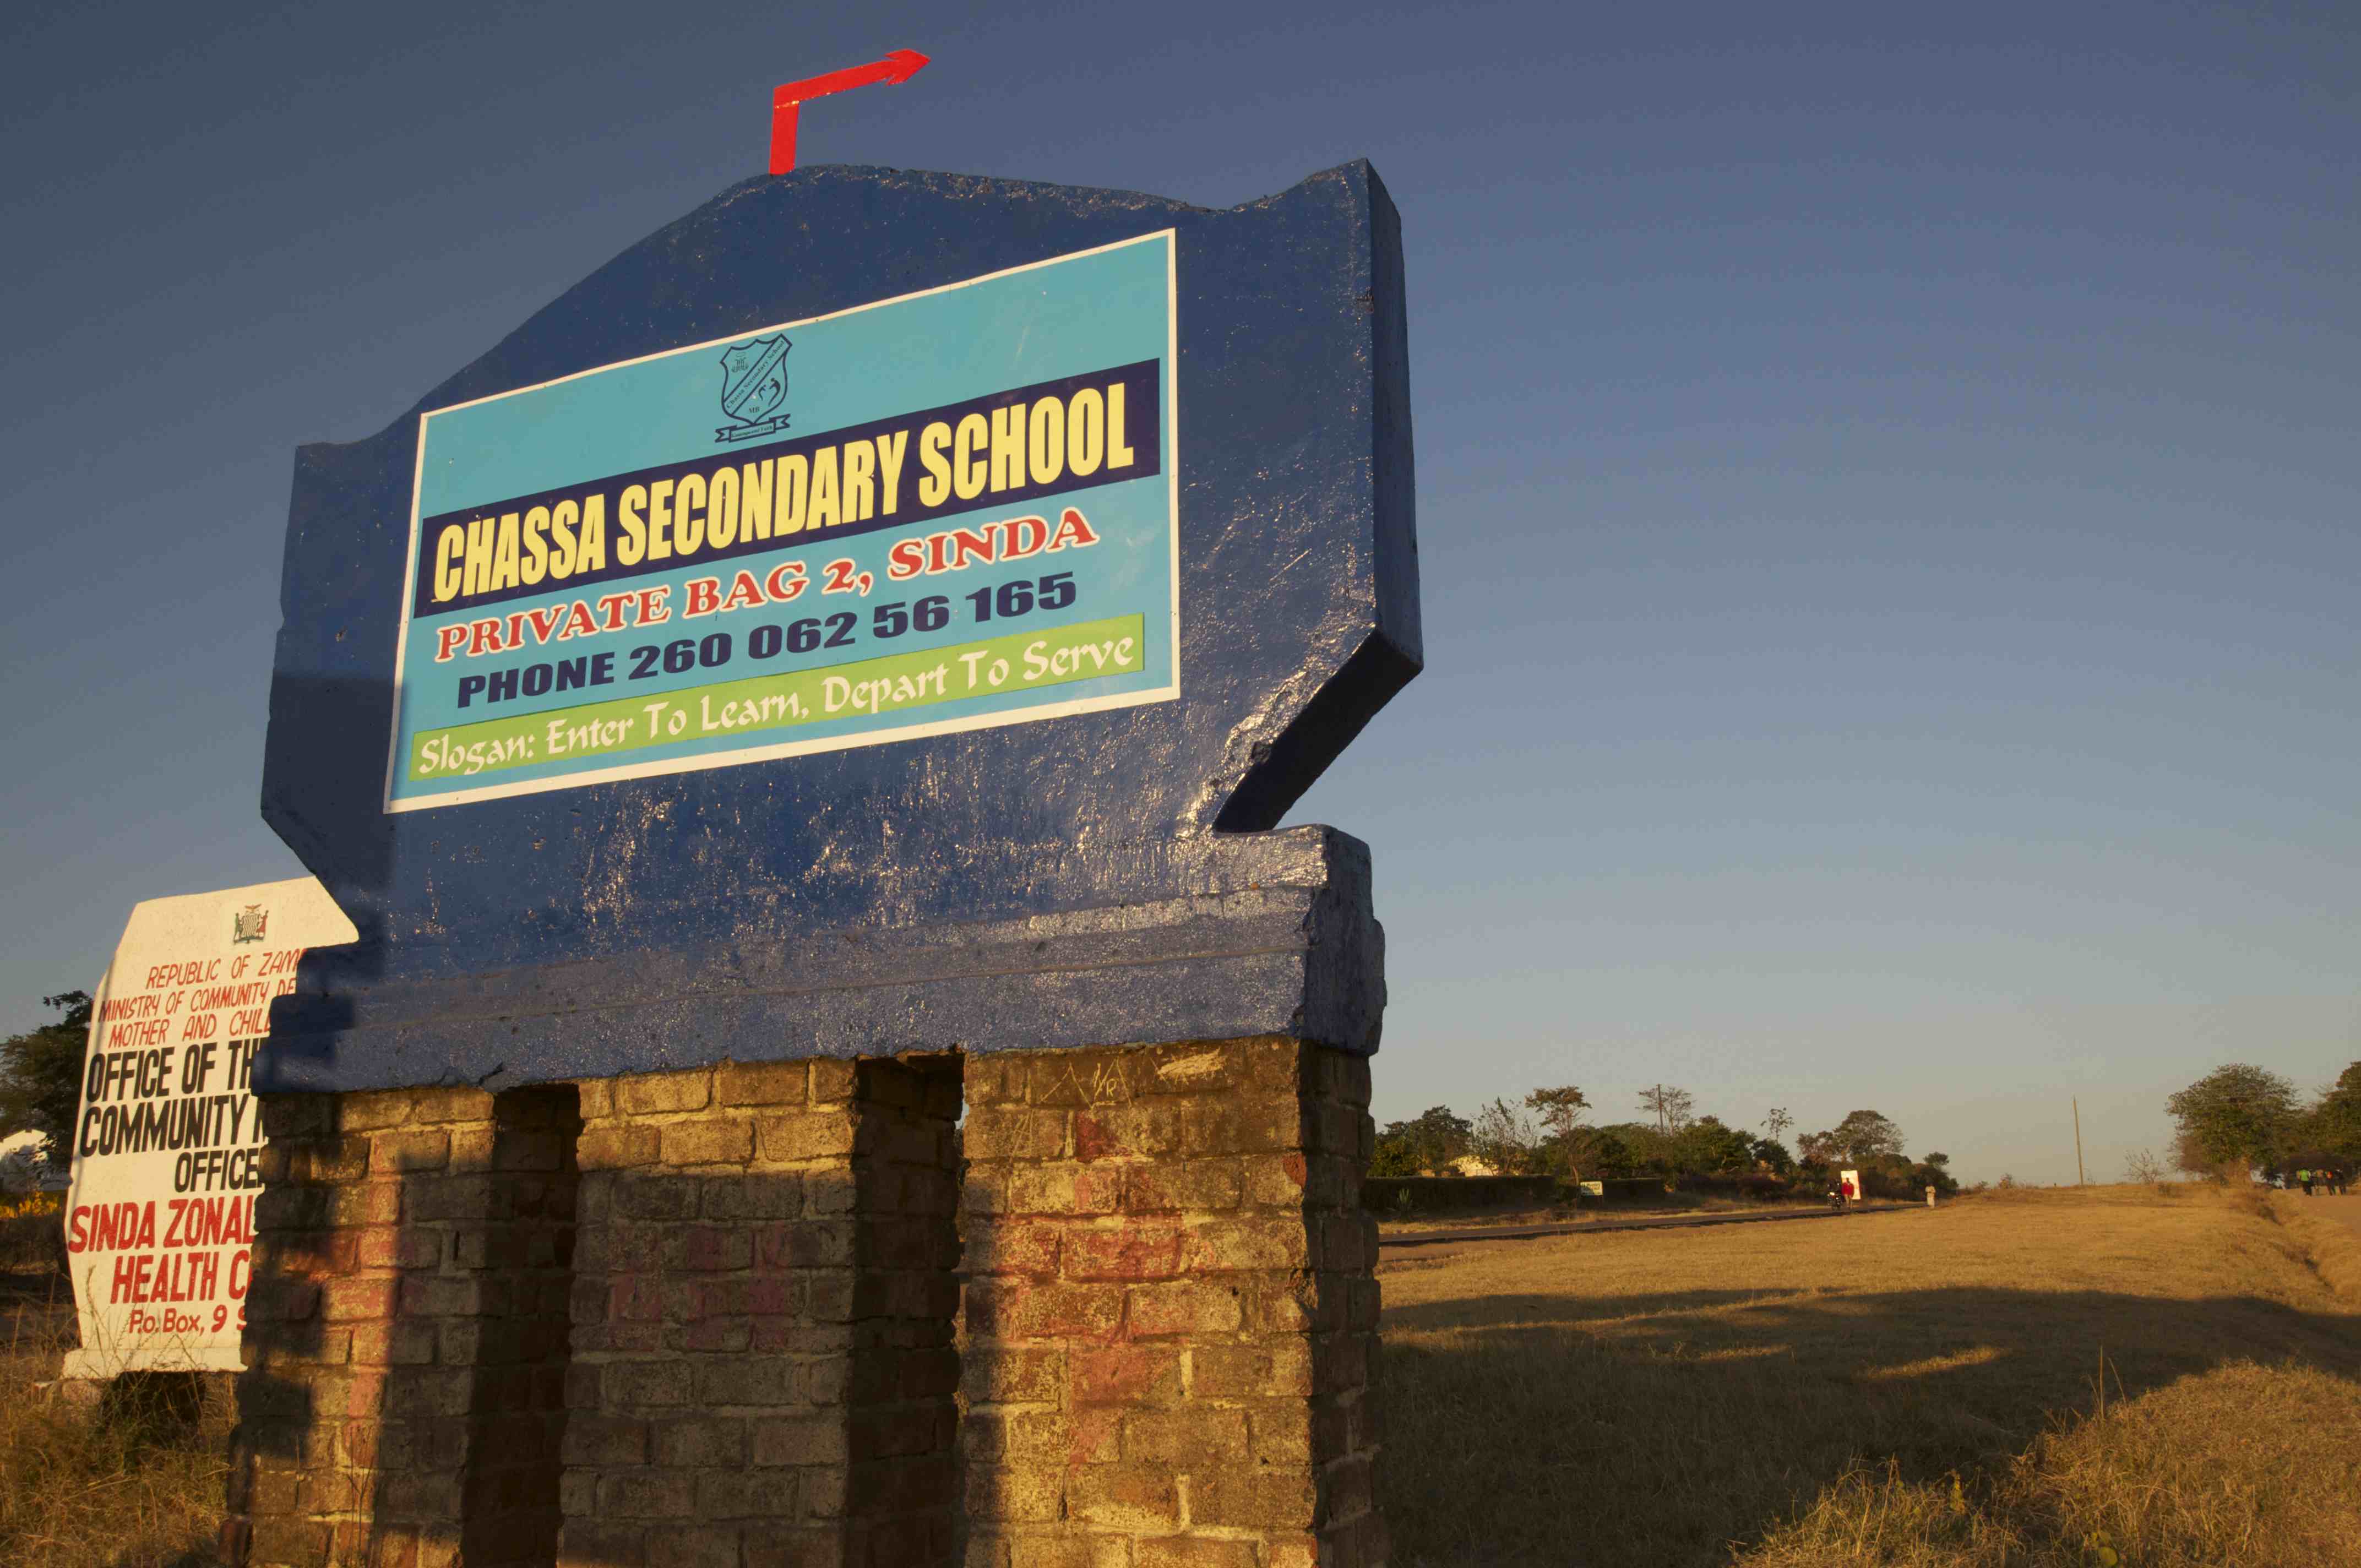 On the way to Chipata, Moses asked me to stop and take a picture of this sign - the high school he went to as a youth.